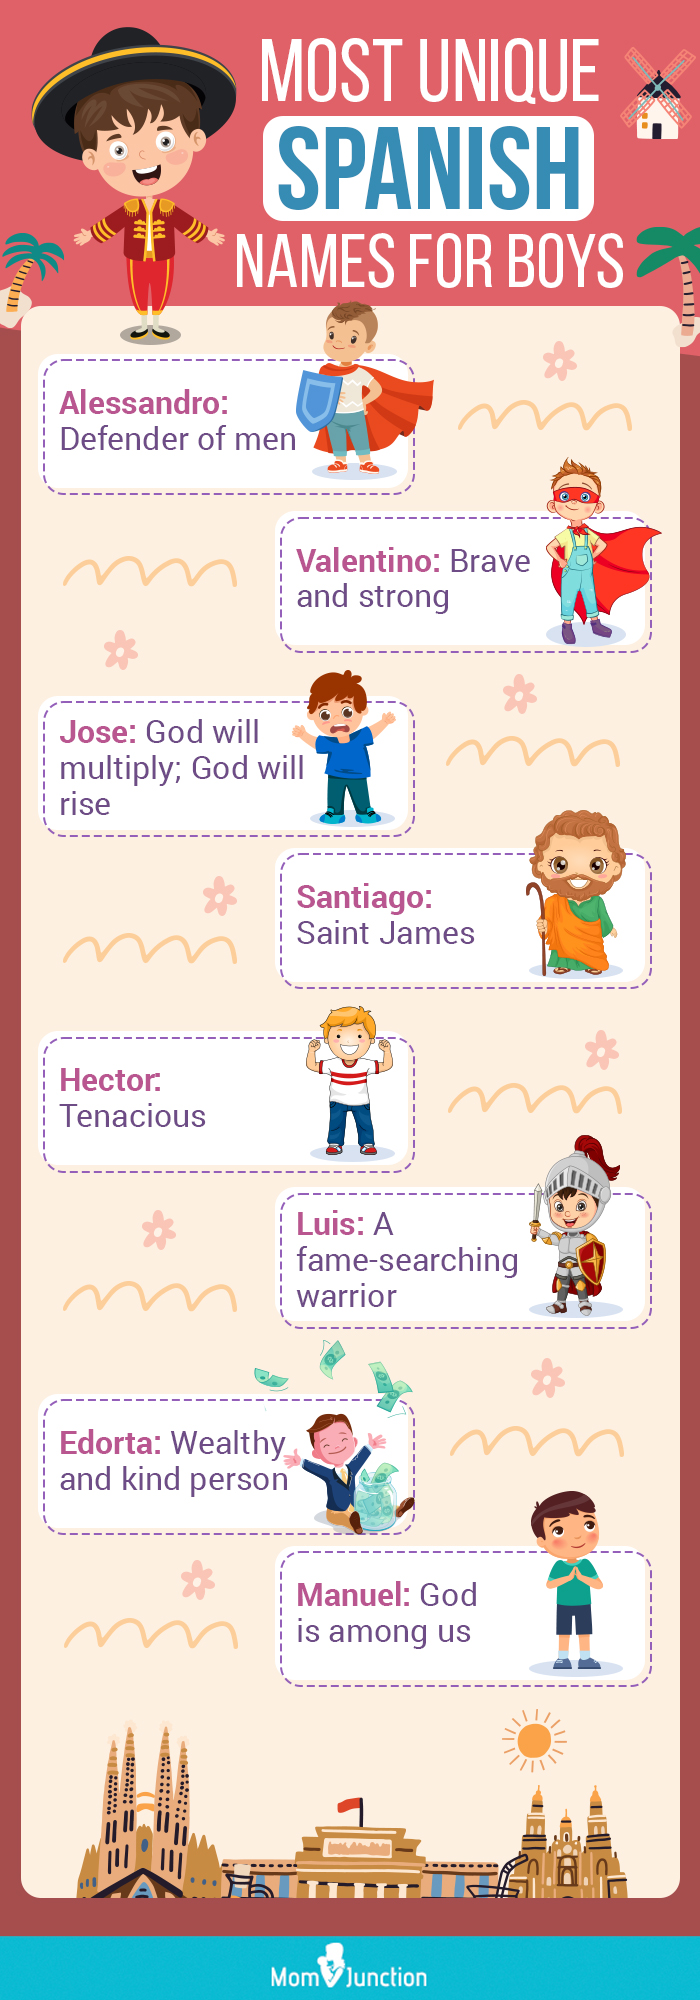 most unique spanish names for boys(infographic)